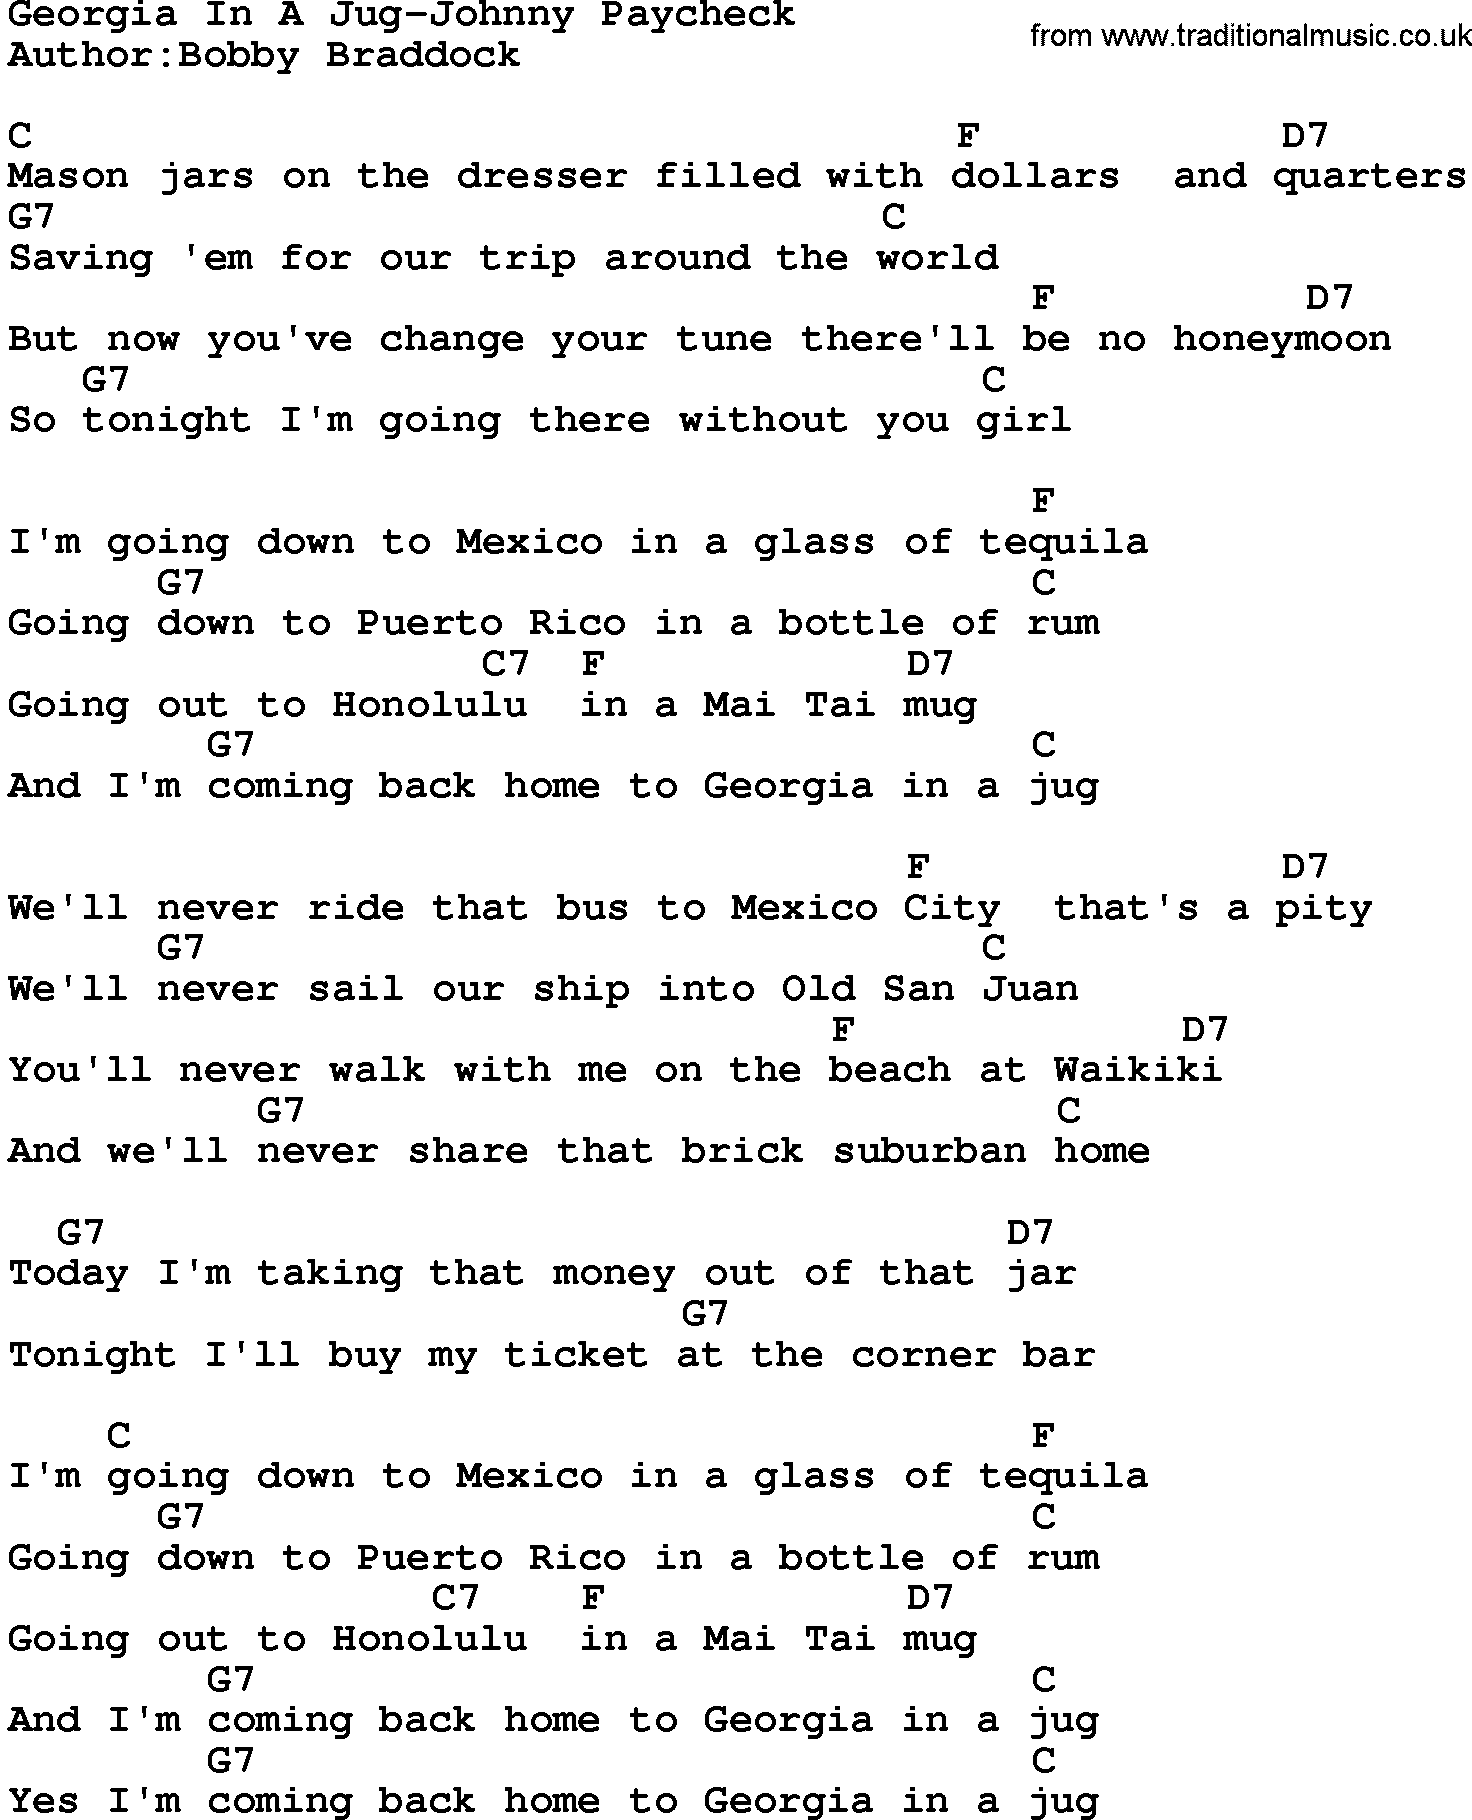 Country music song: Georgia In A Jug-Johnny Paycheck lyrics and chords